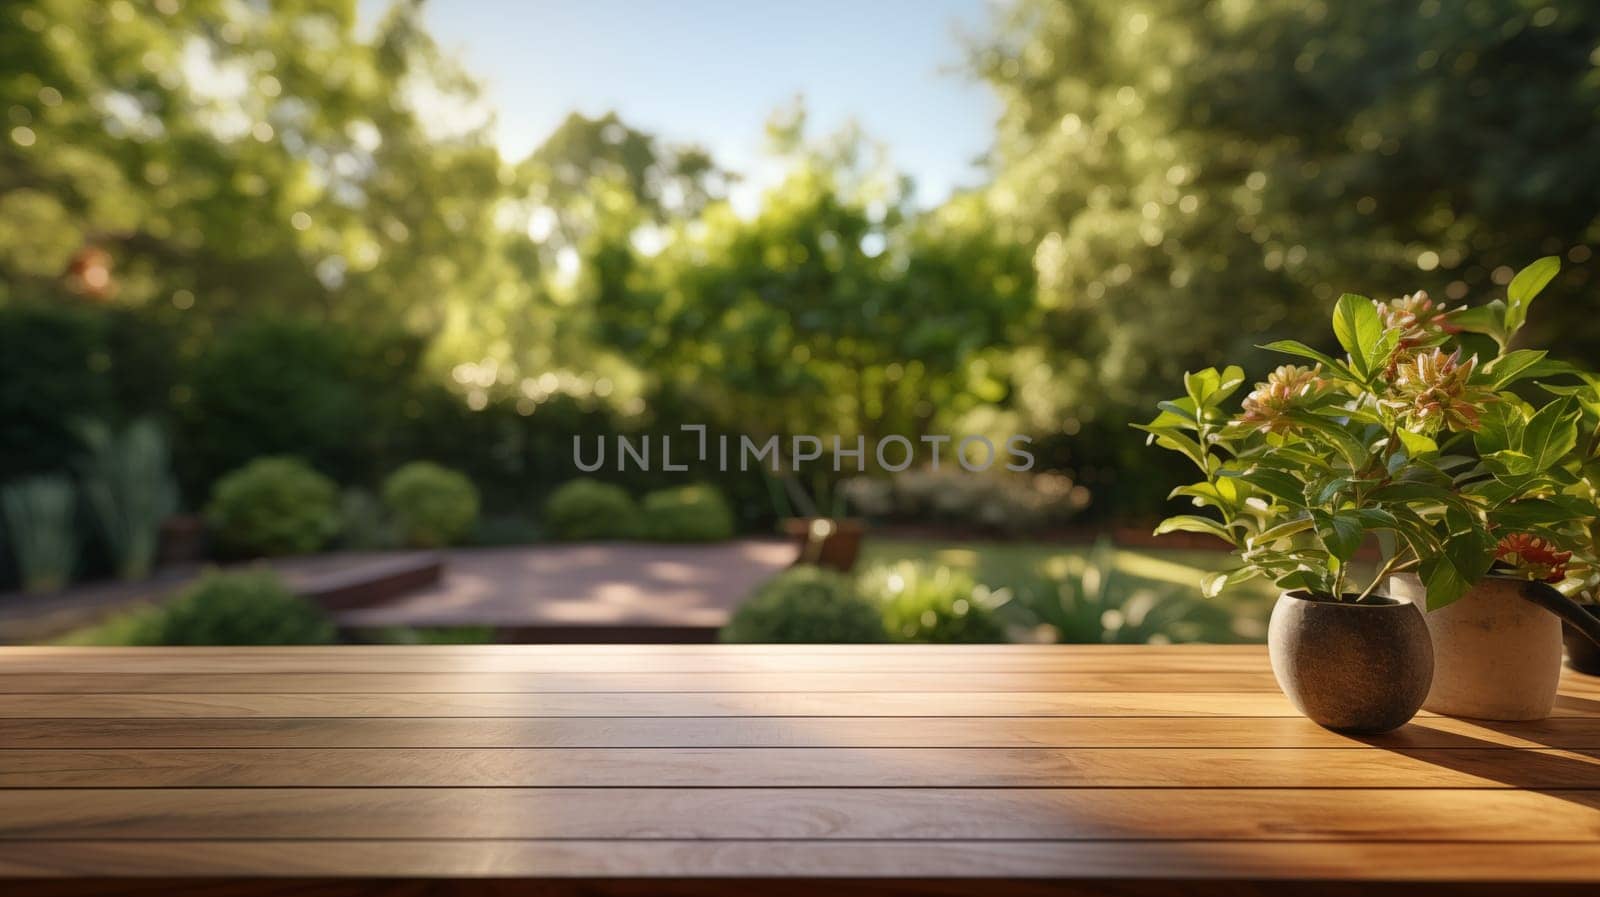 Peaceful garden scene with sunlit foliage and flowering plant on wooden table. Place for your product